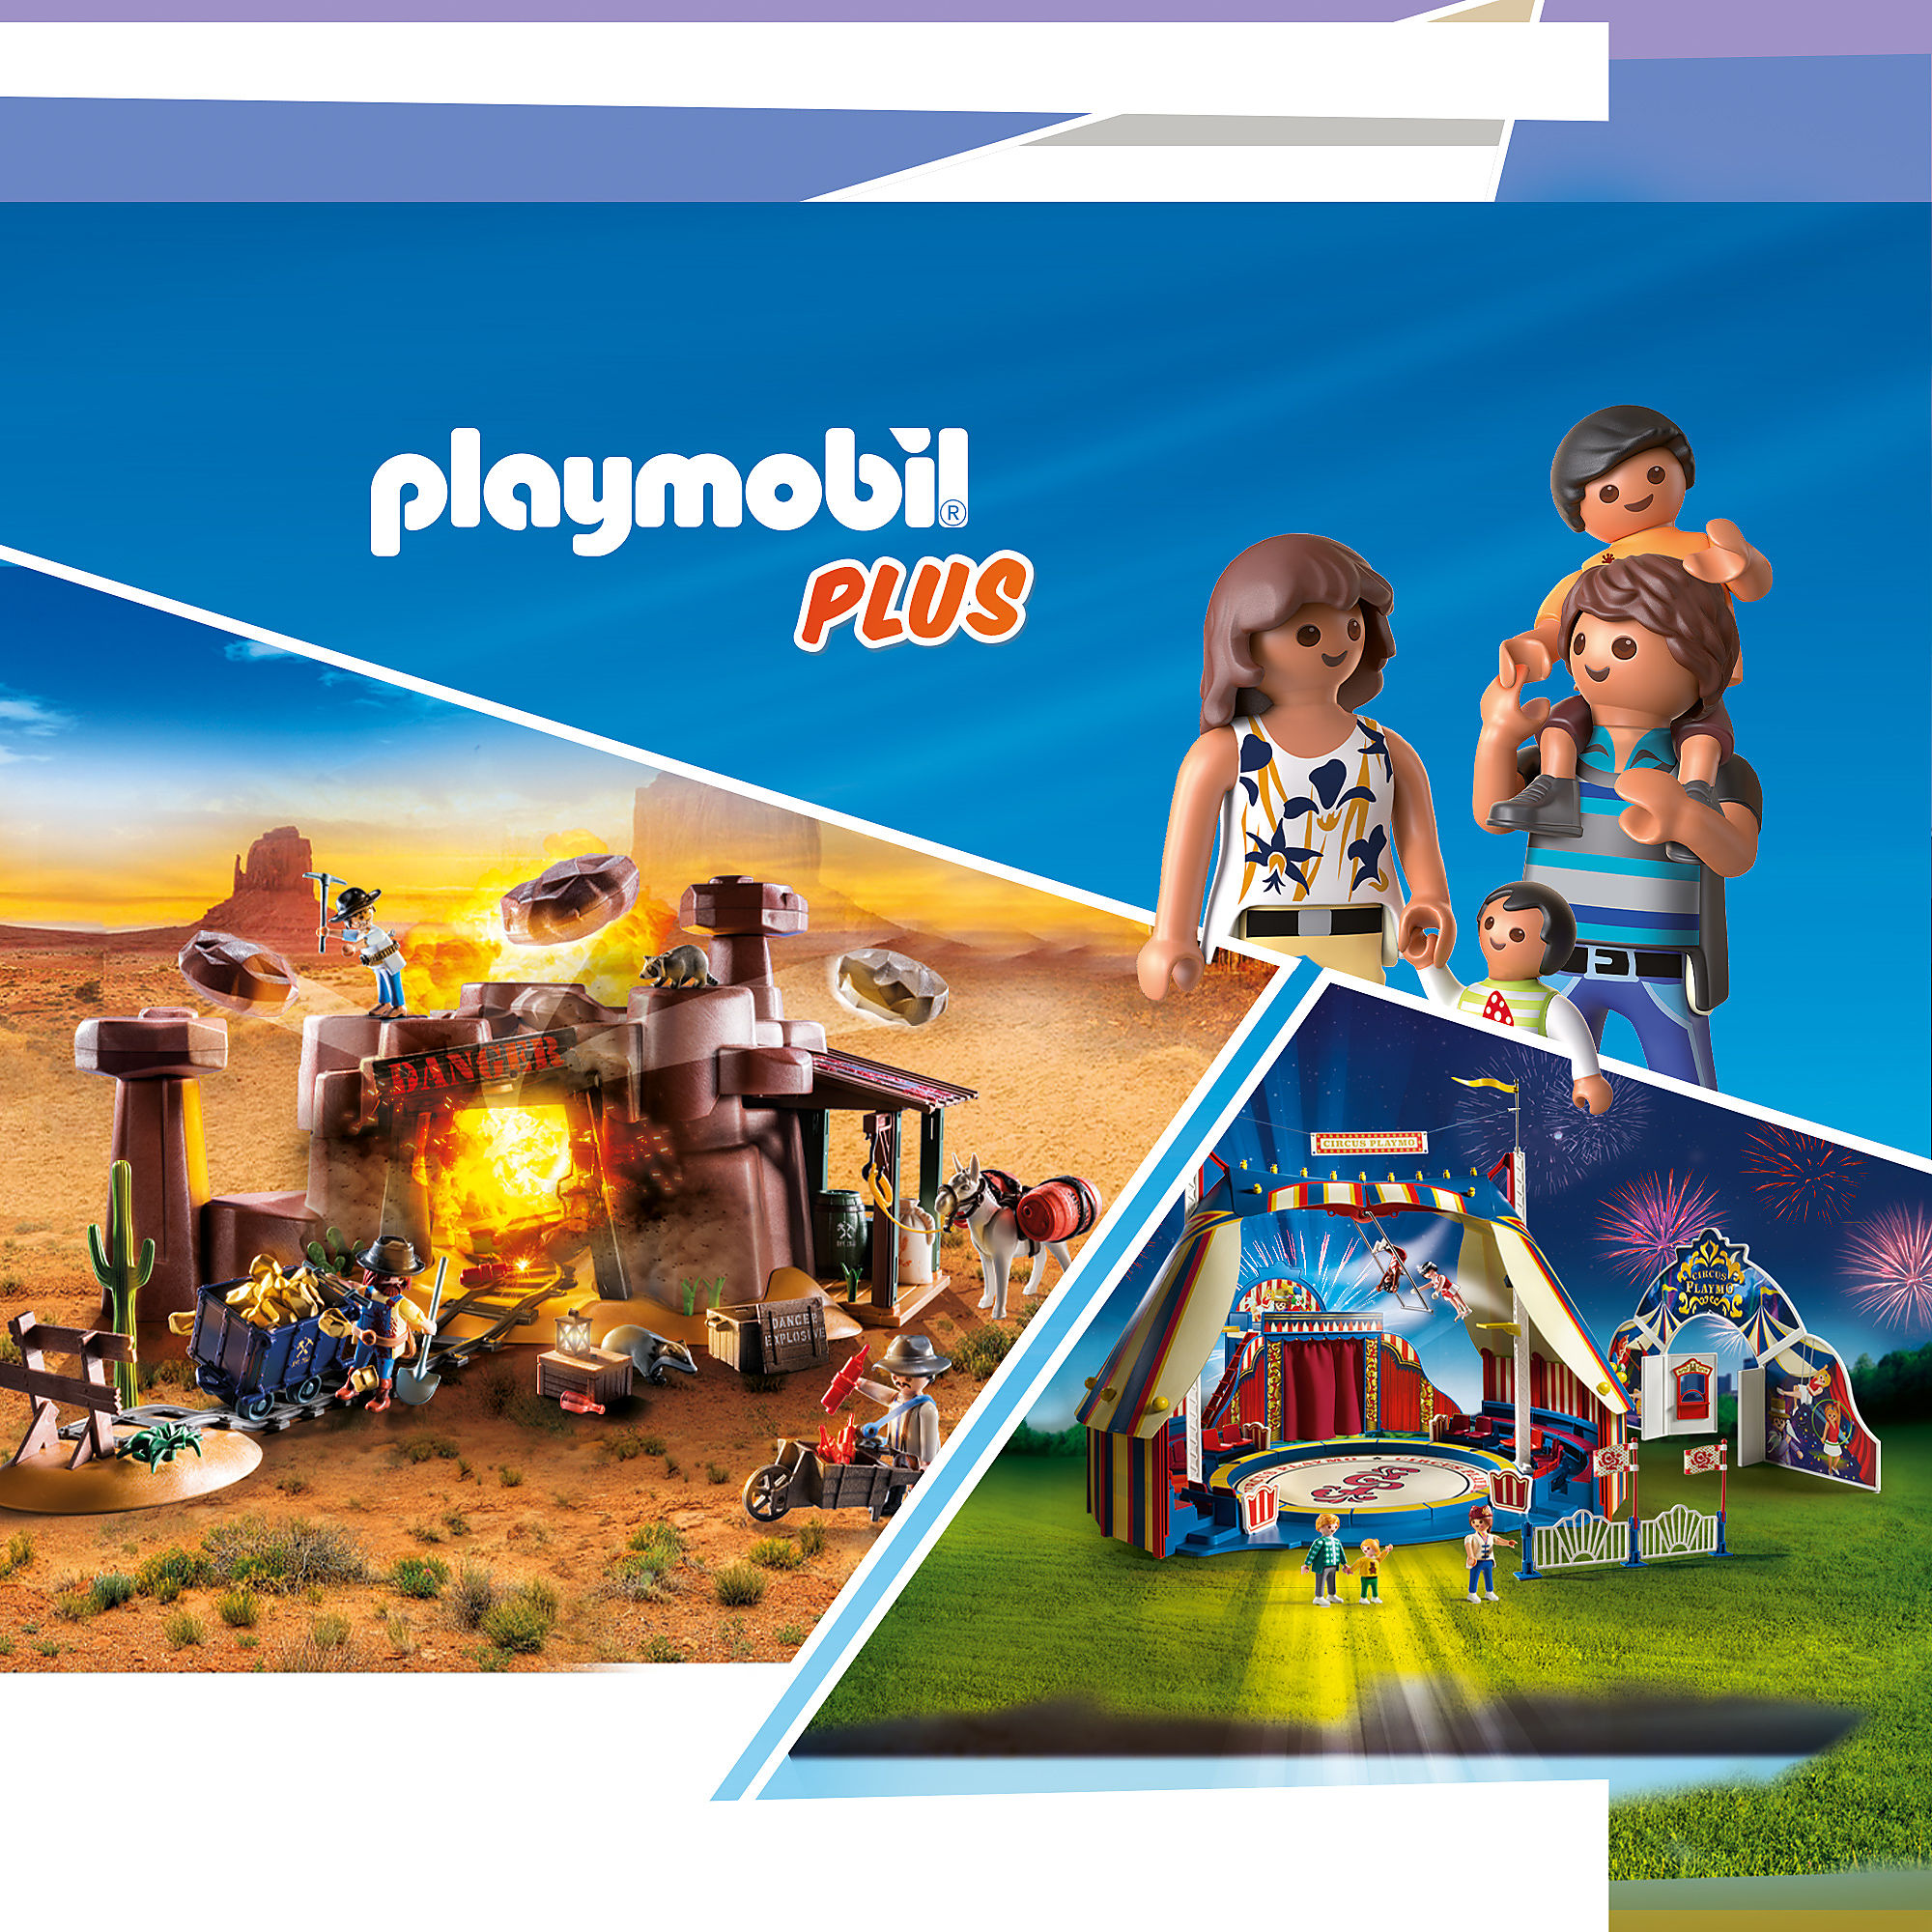 Playmobil Toys for sale in Bryan, Texas